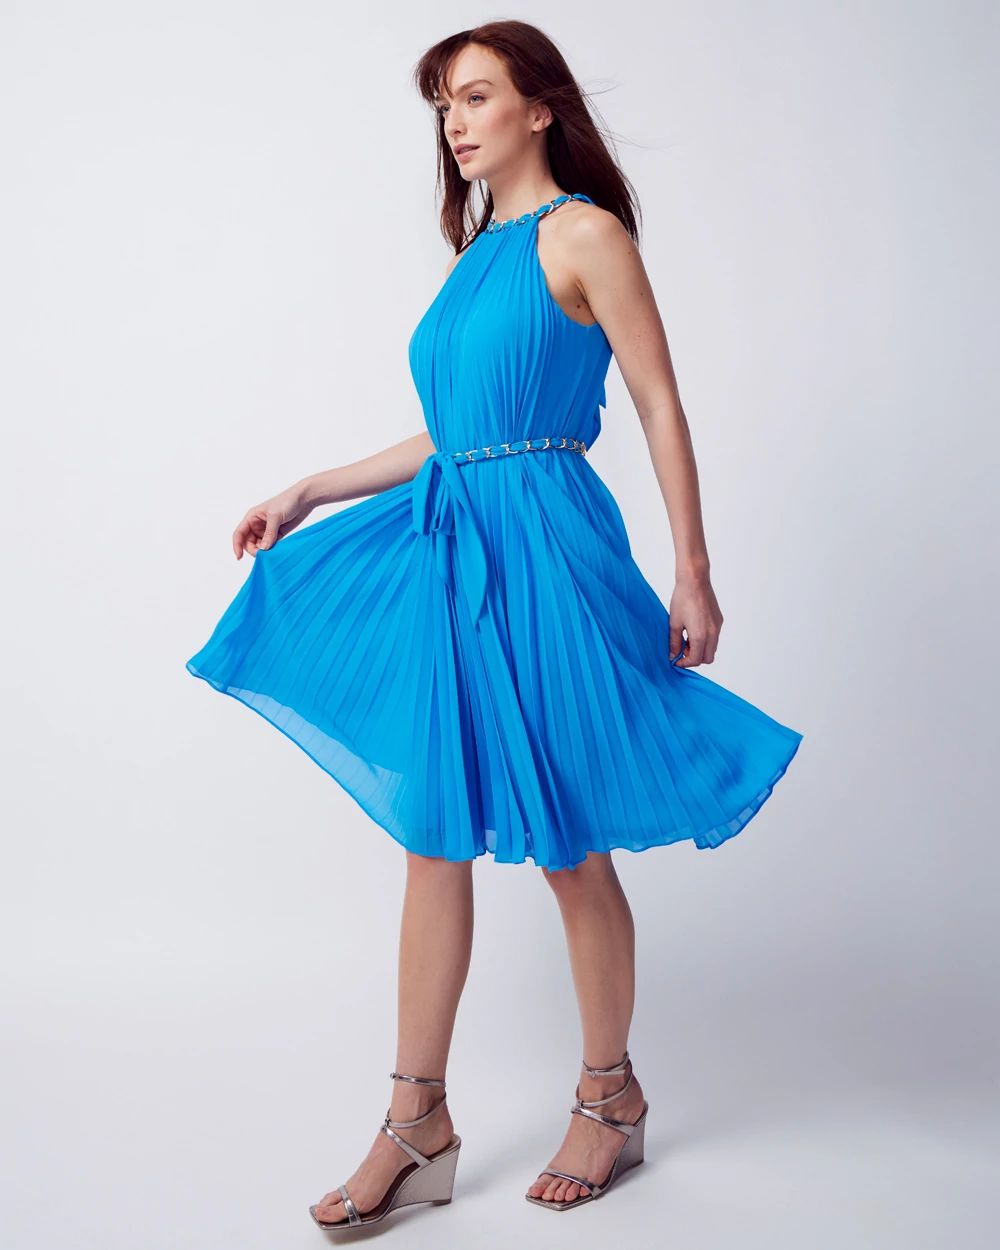 Sleeveless Pleated Halter Dress with Chain Detail click to view larger image.